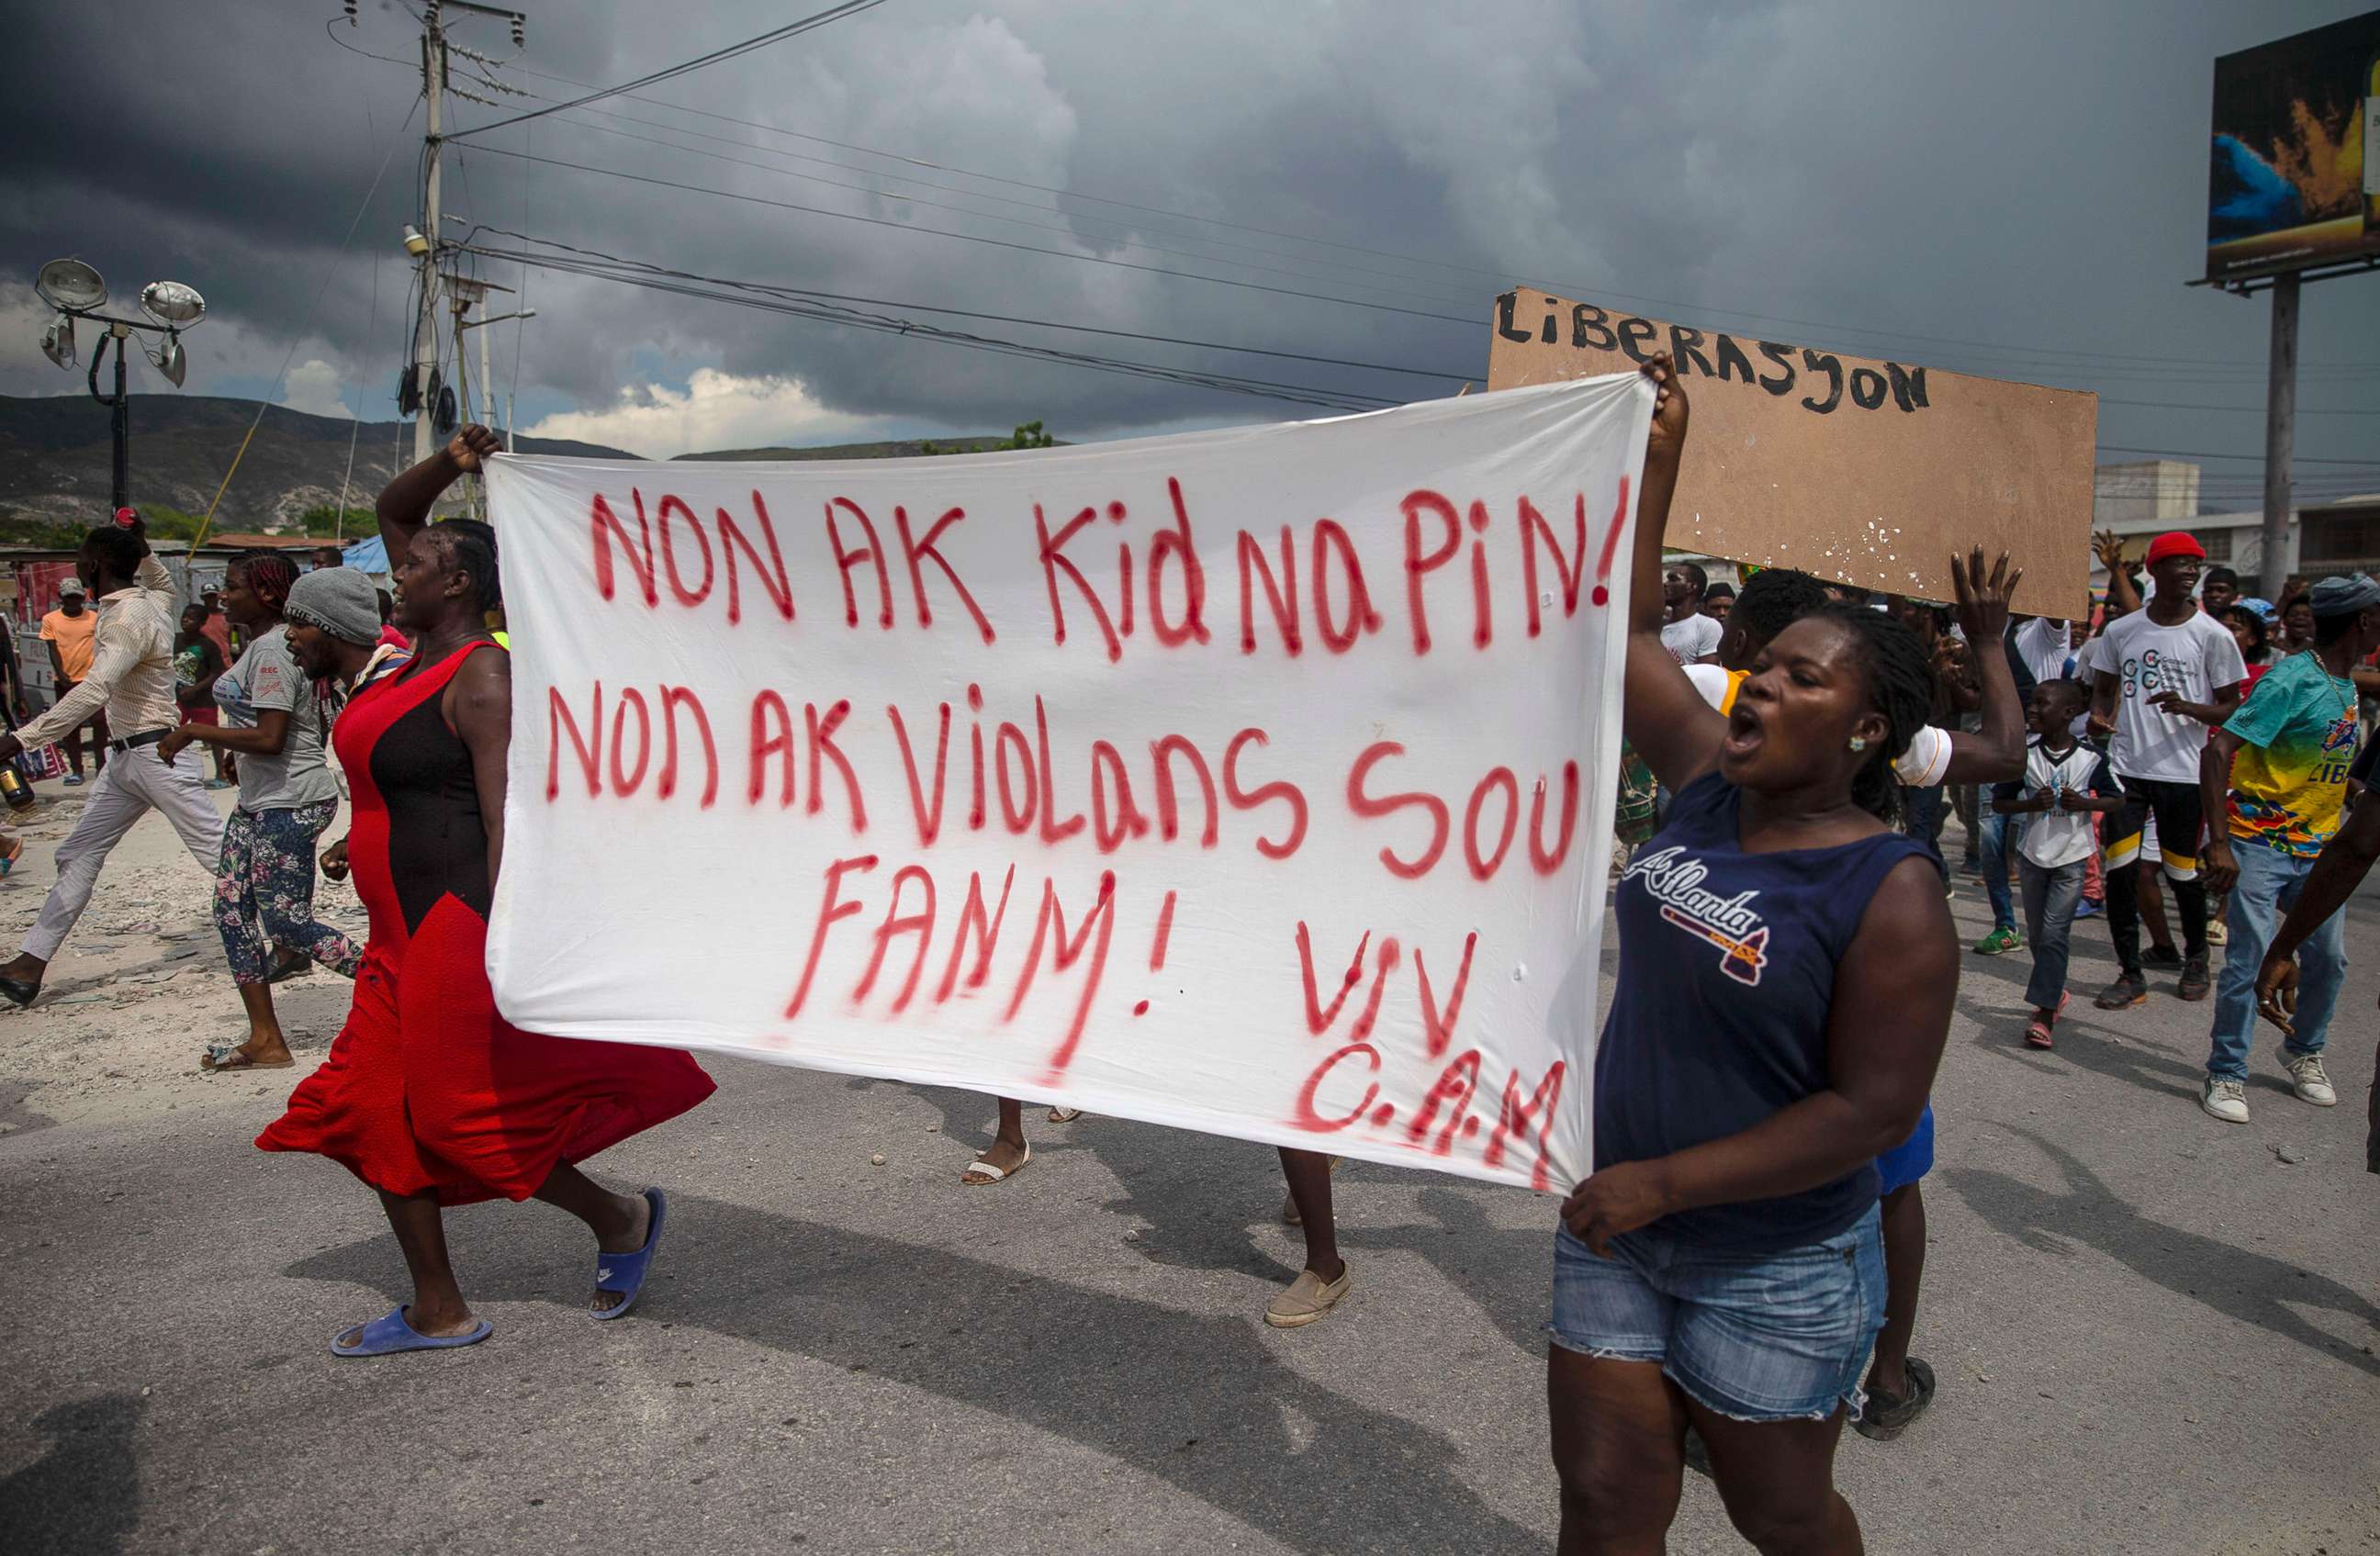 PHOTO: People protest carrying a banner with a message in Creole demanding the release of kidnapped missionaries, in Titanyen, north of Port-au-Prince, Haiti, Oct. 19, 2021.